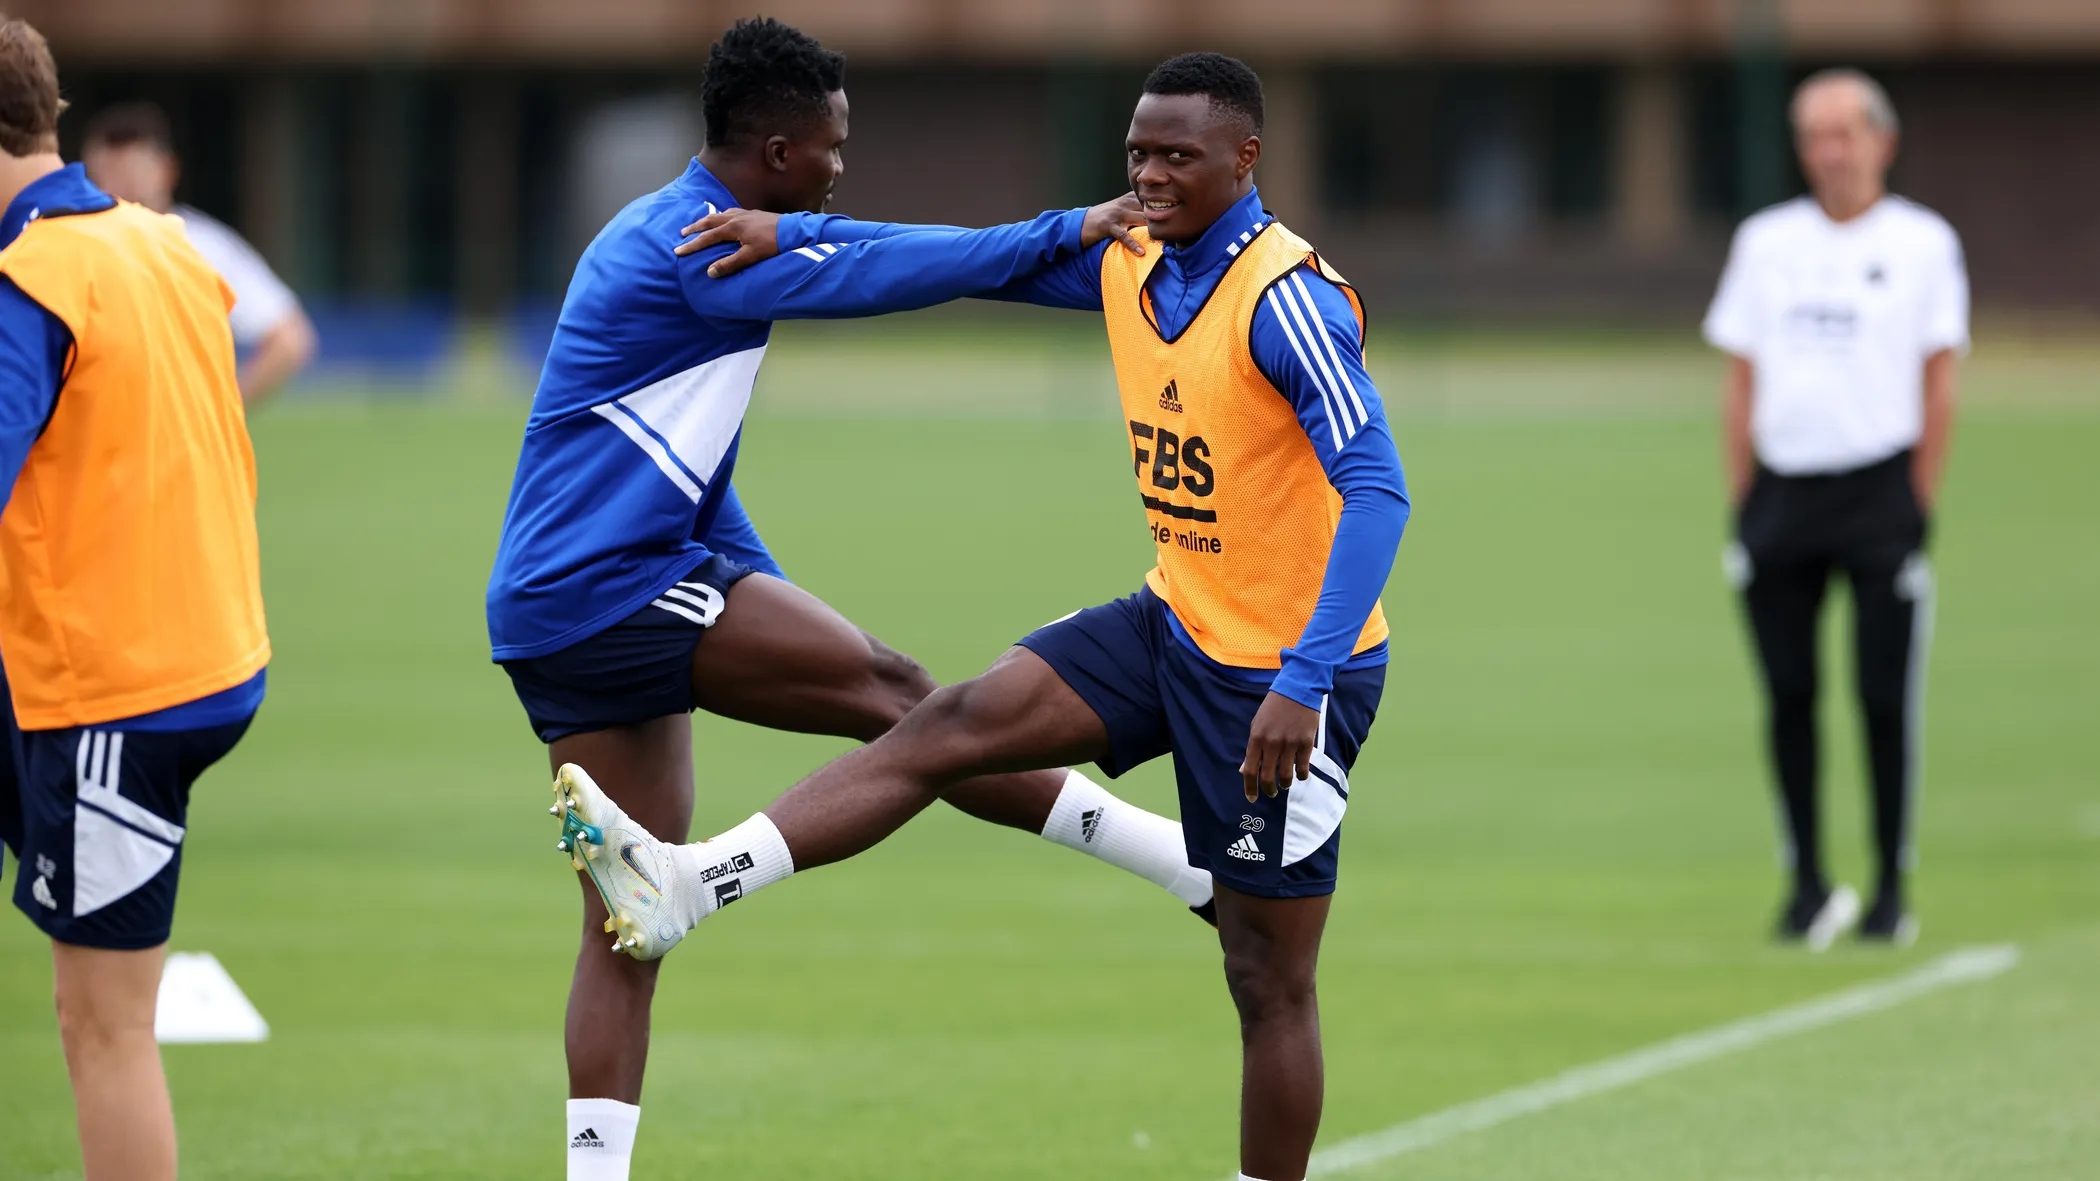 patson-daka-leads-leicester-city-squad-for-derby-county-friendly-match